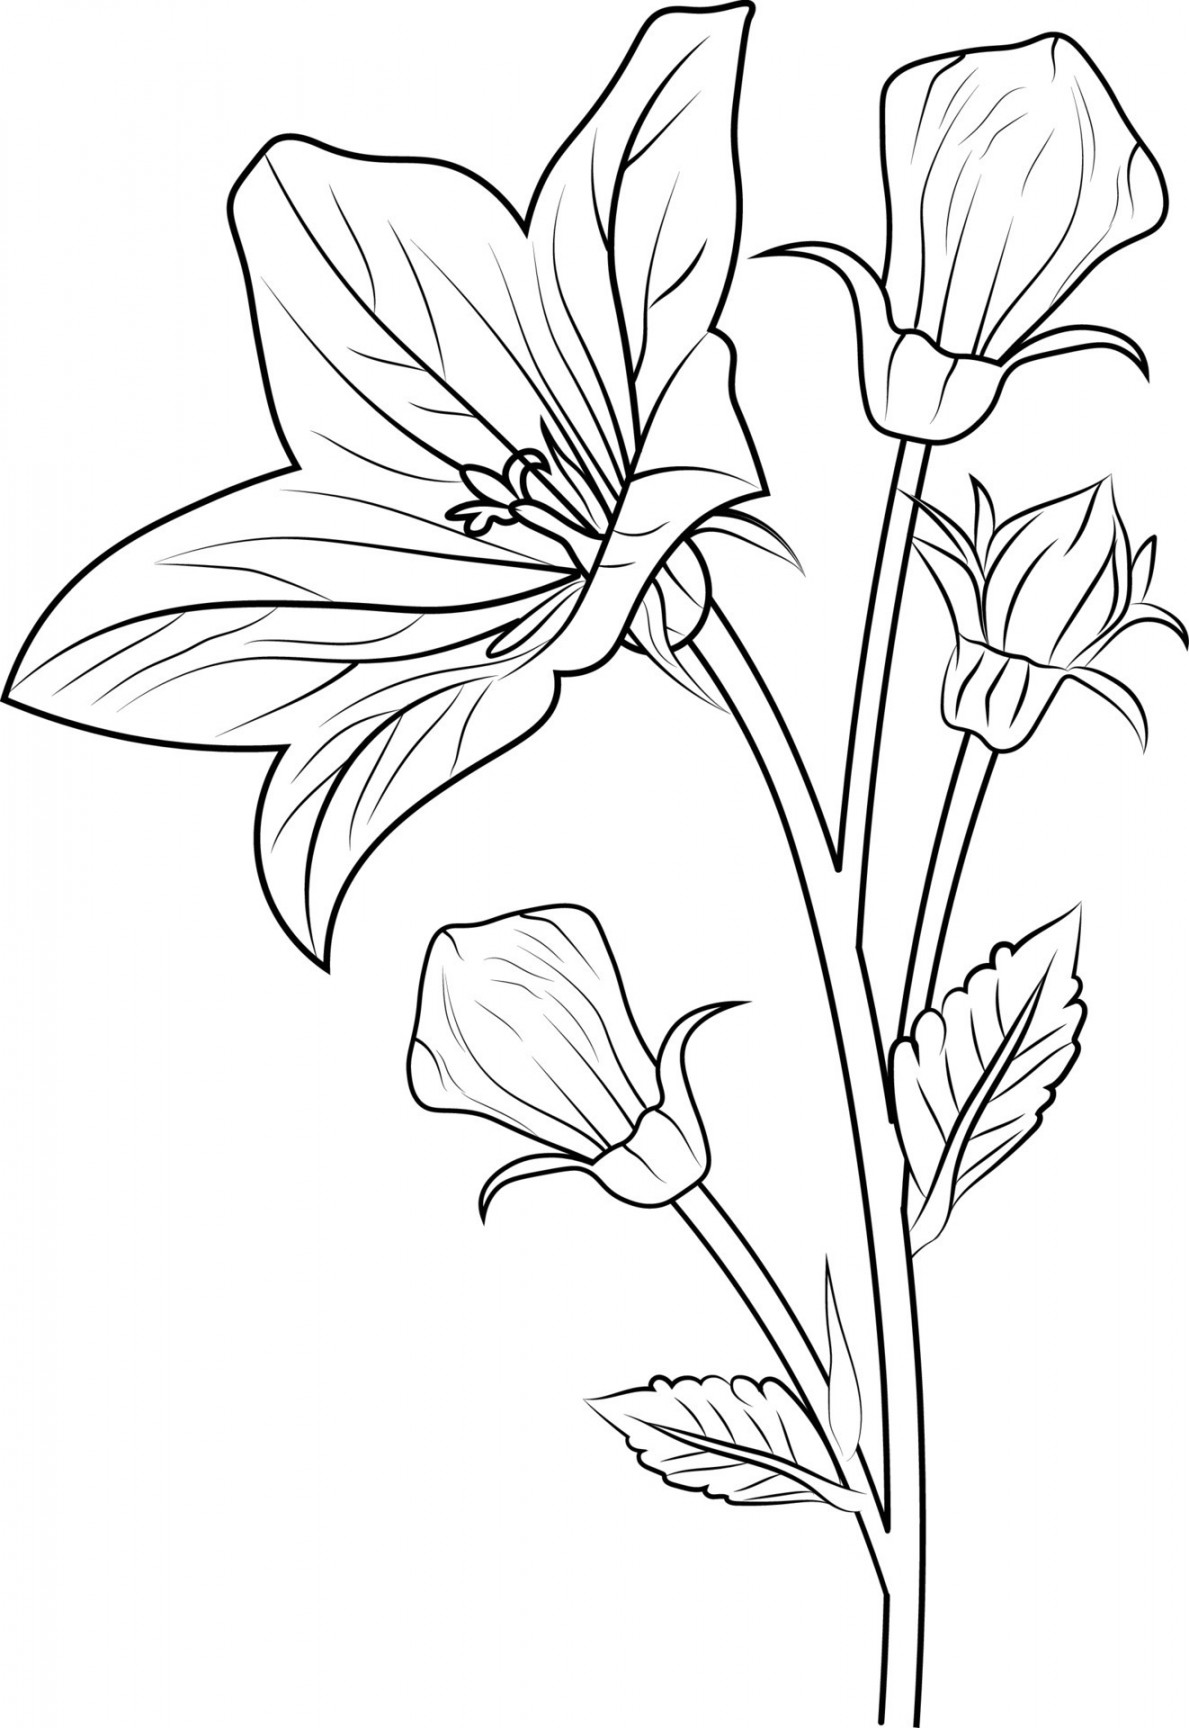 Easy yellow bellfloer drawing, illustration sketch of hand-drawn